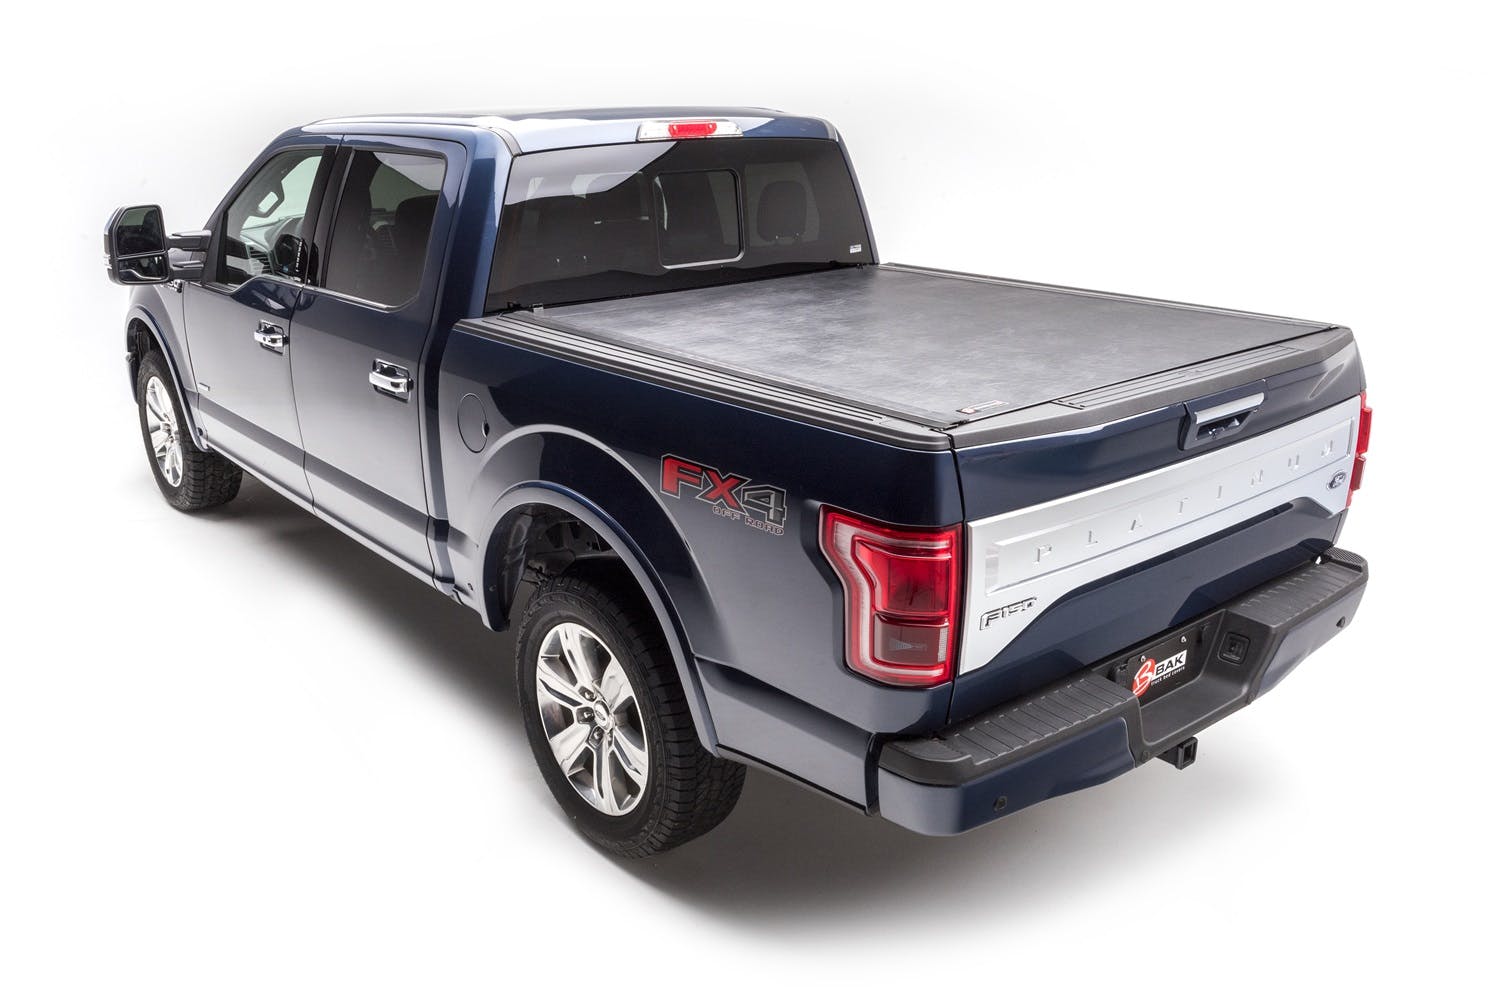 BAK Industries 39505 Revolver X2 Hard Rolling Truck Bed Cover